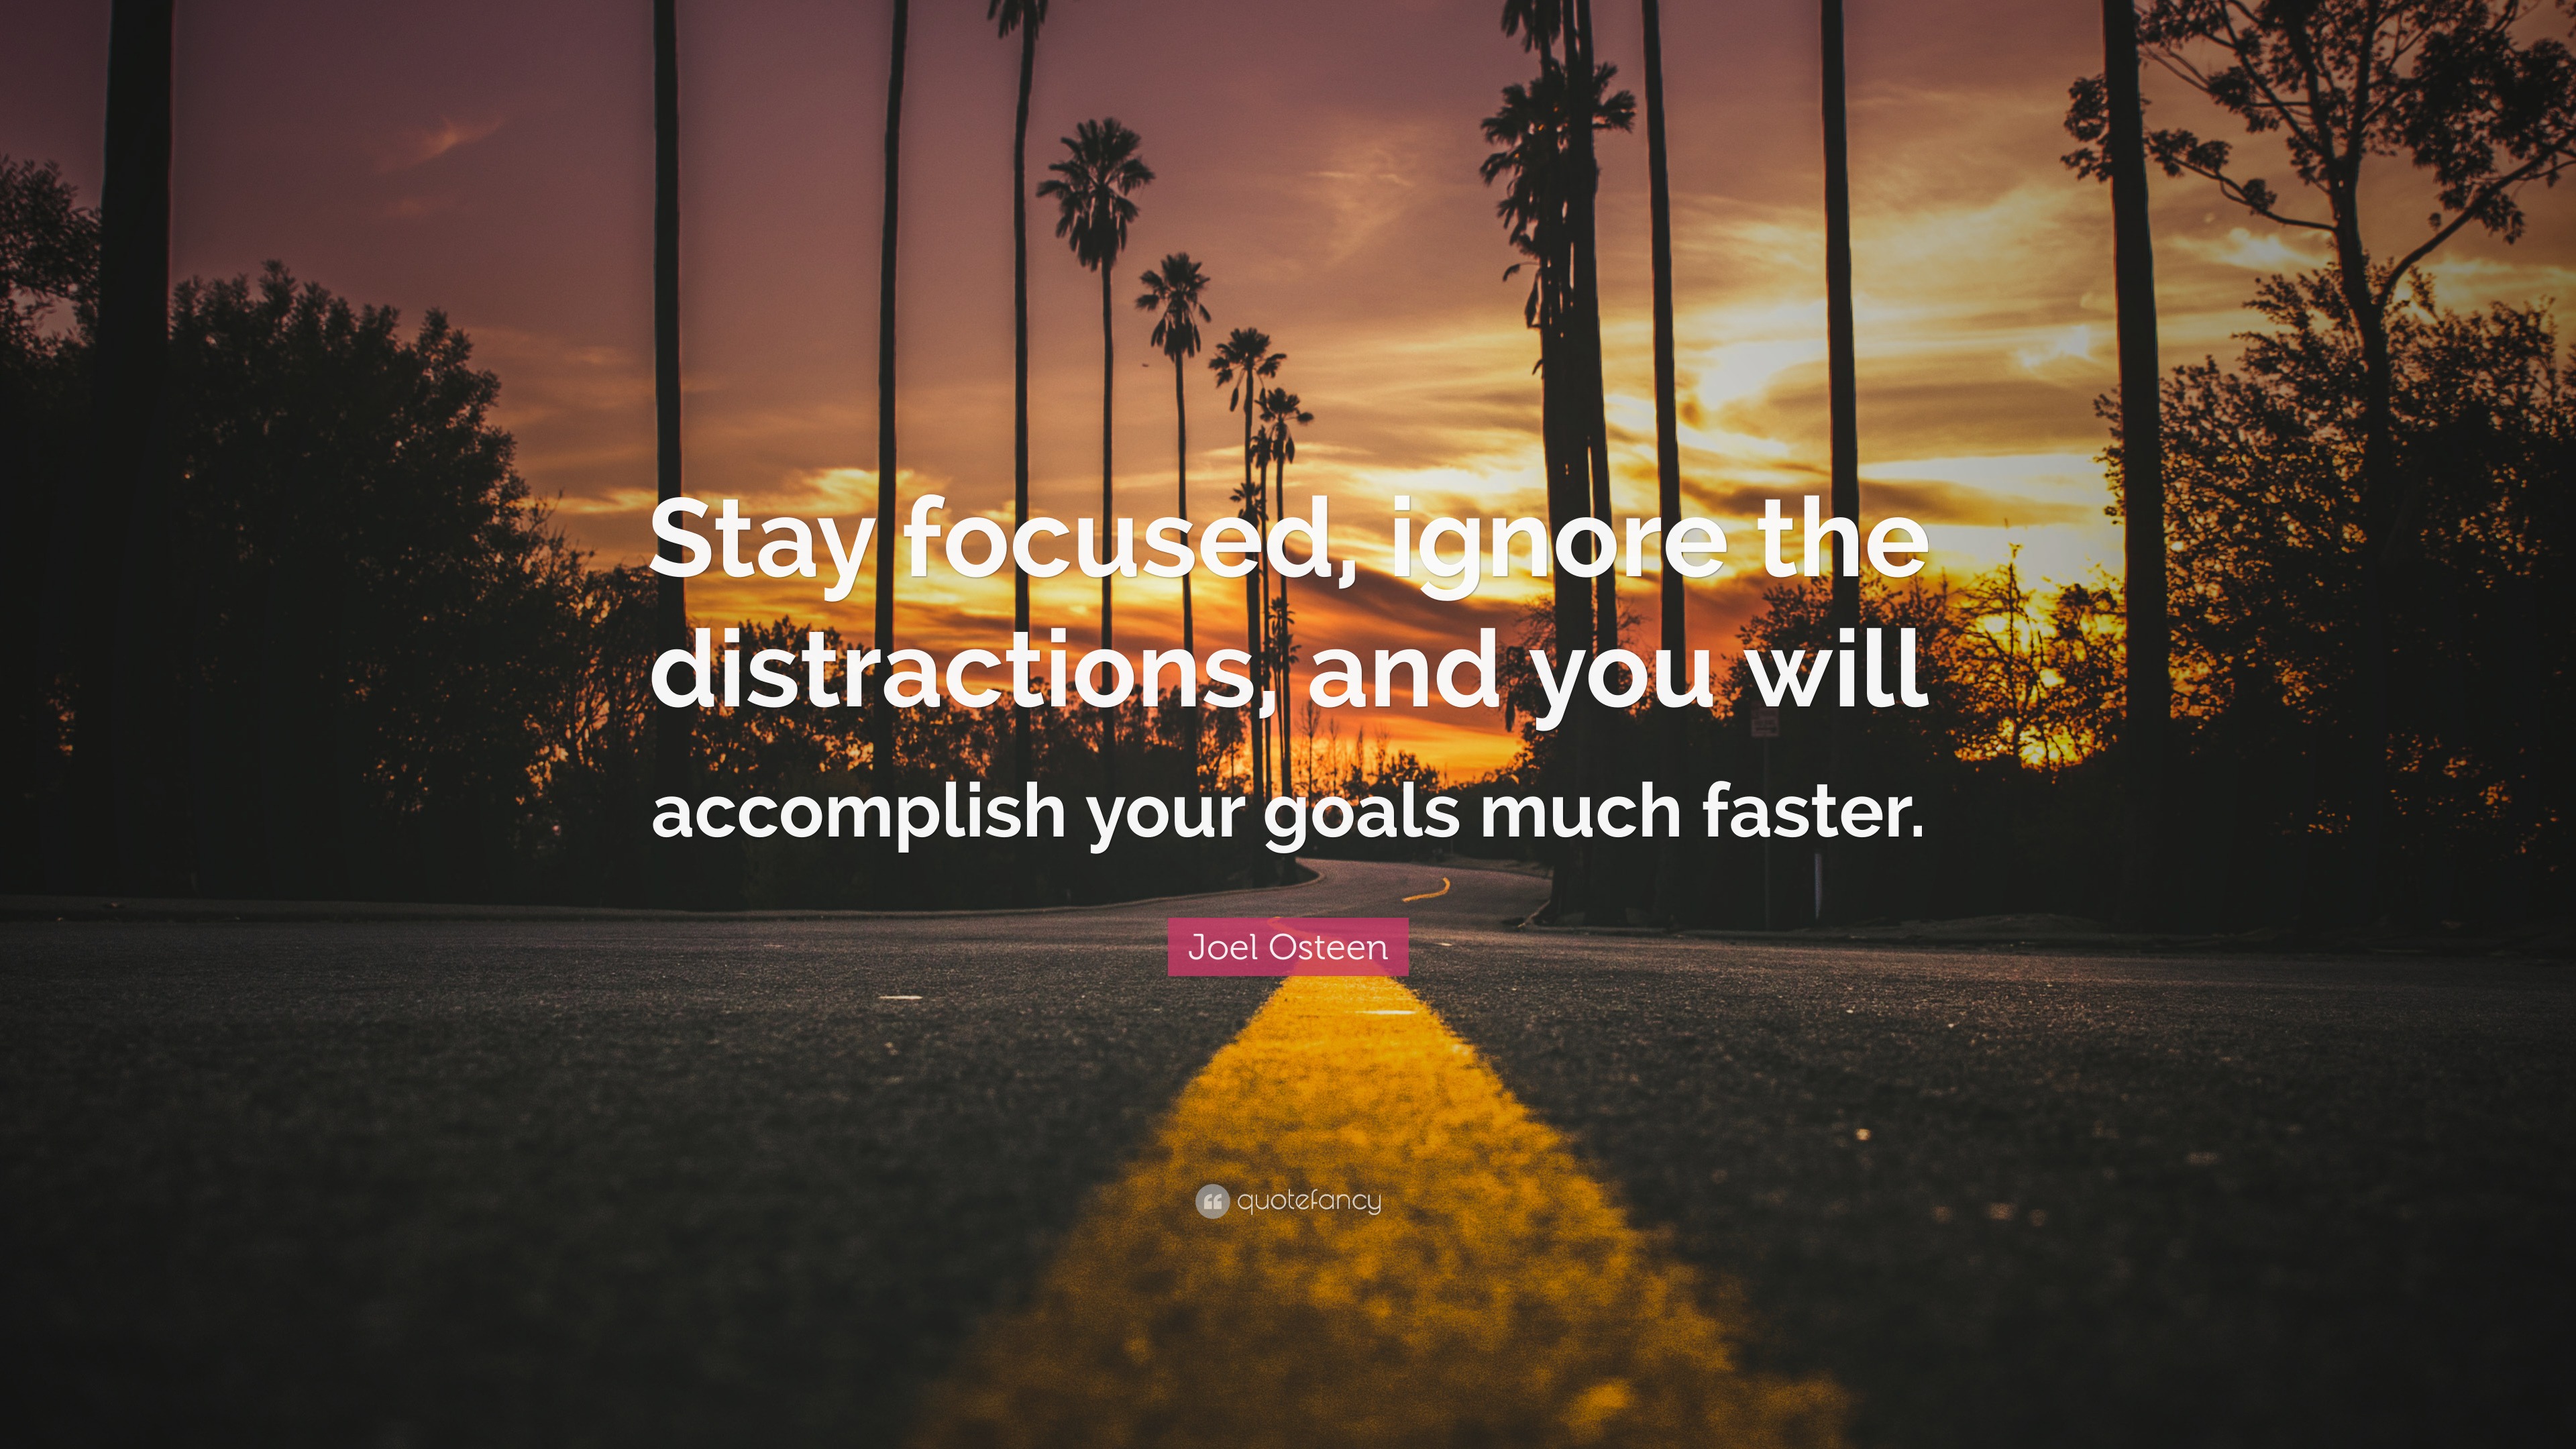 4674644 Joel Osteen Quote Stay focused ignore the distractions and you